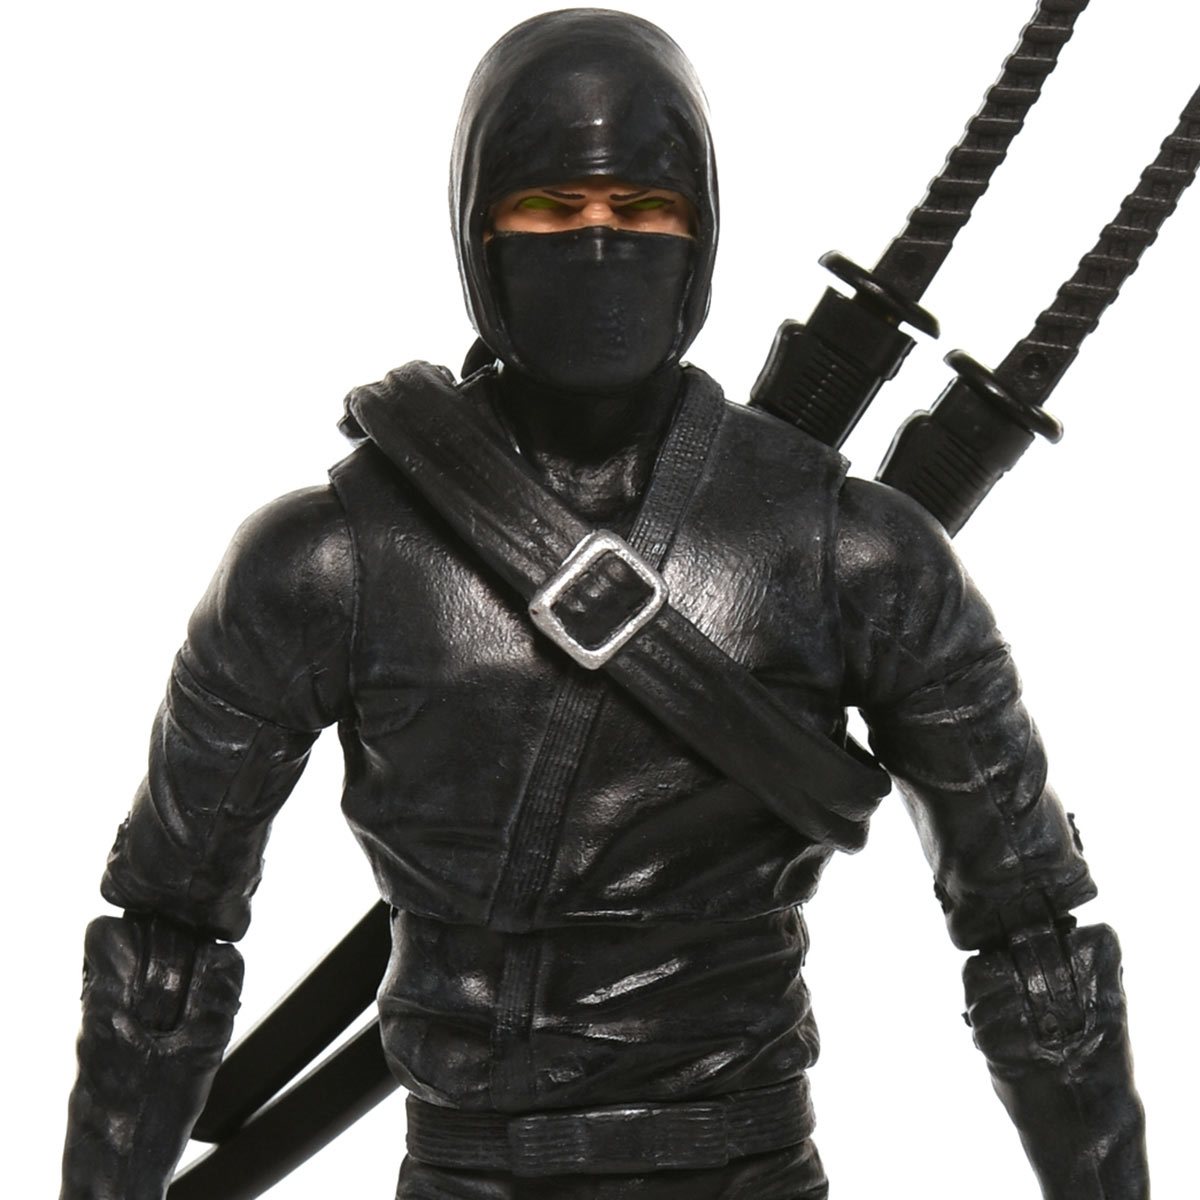 Articulated Icons: Deluxe Ninja Weapons